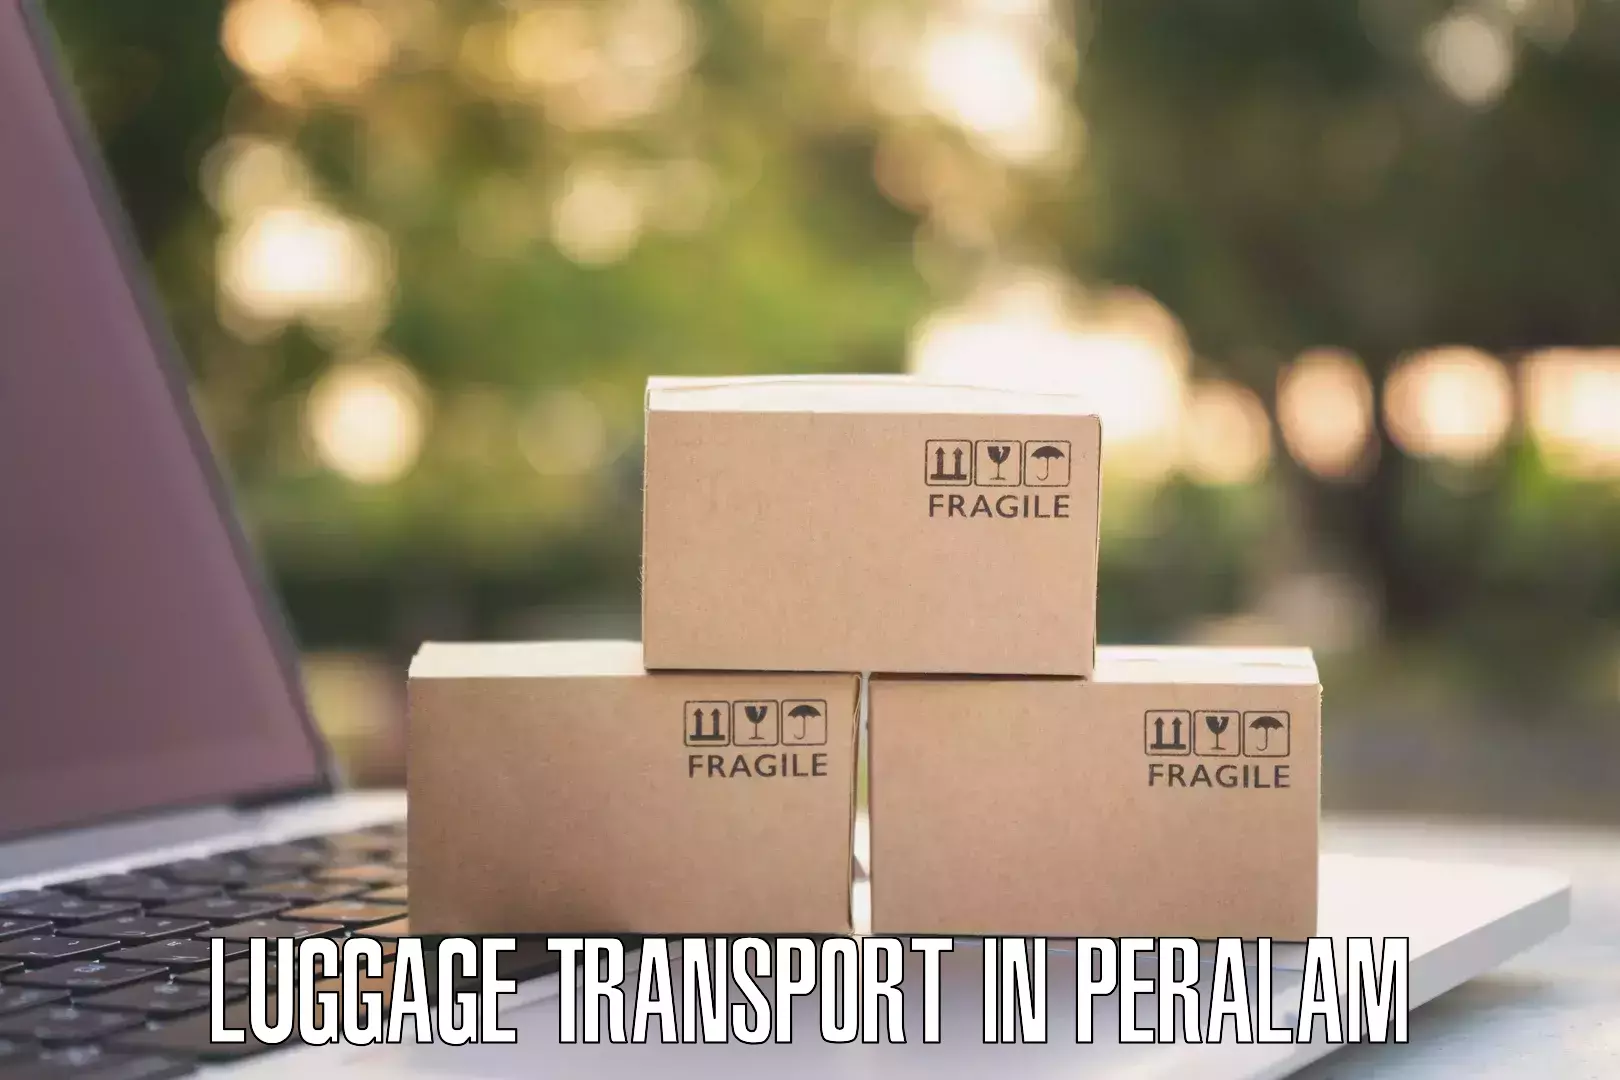 Baggage transport innovation in Peralam